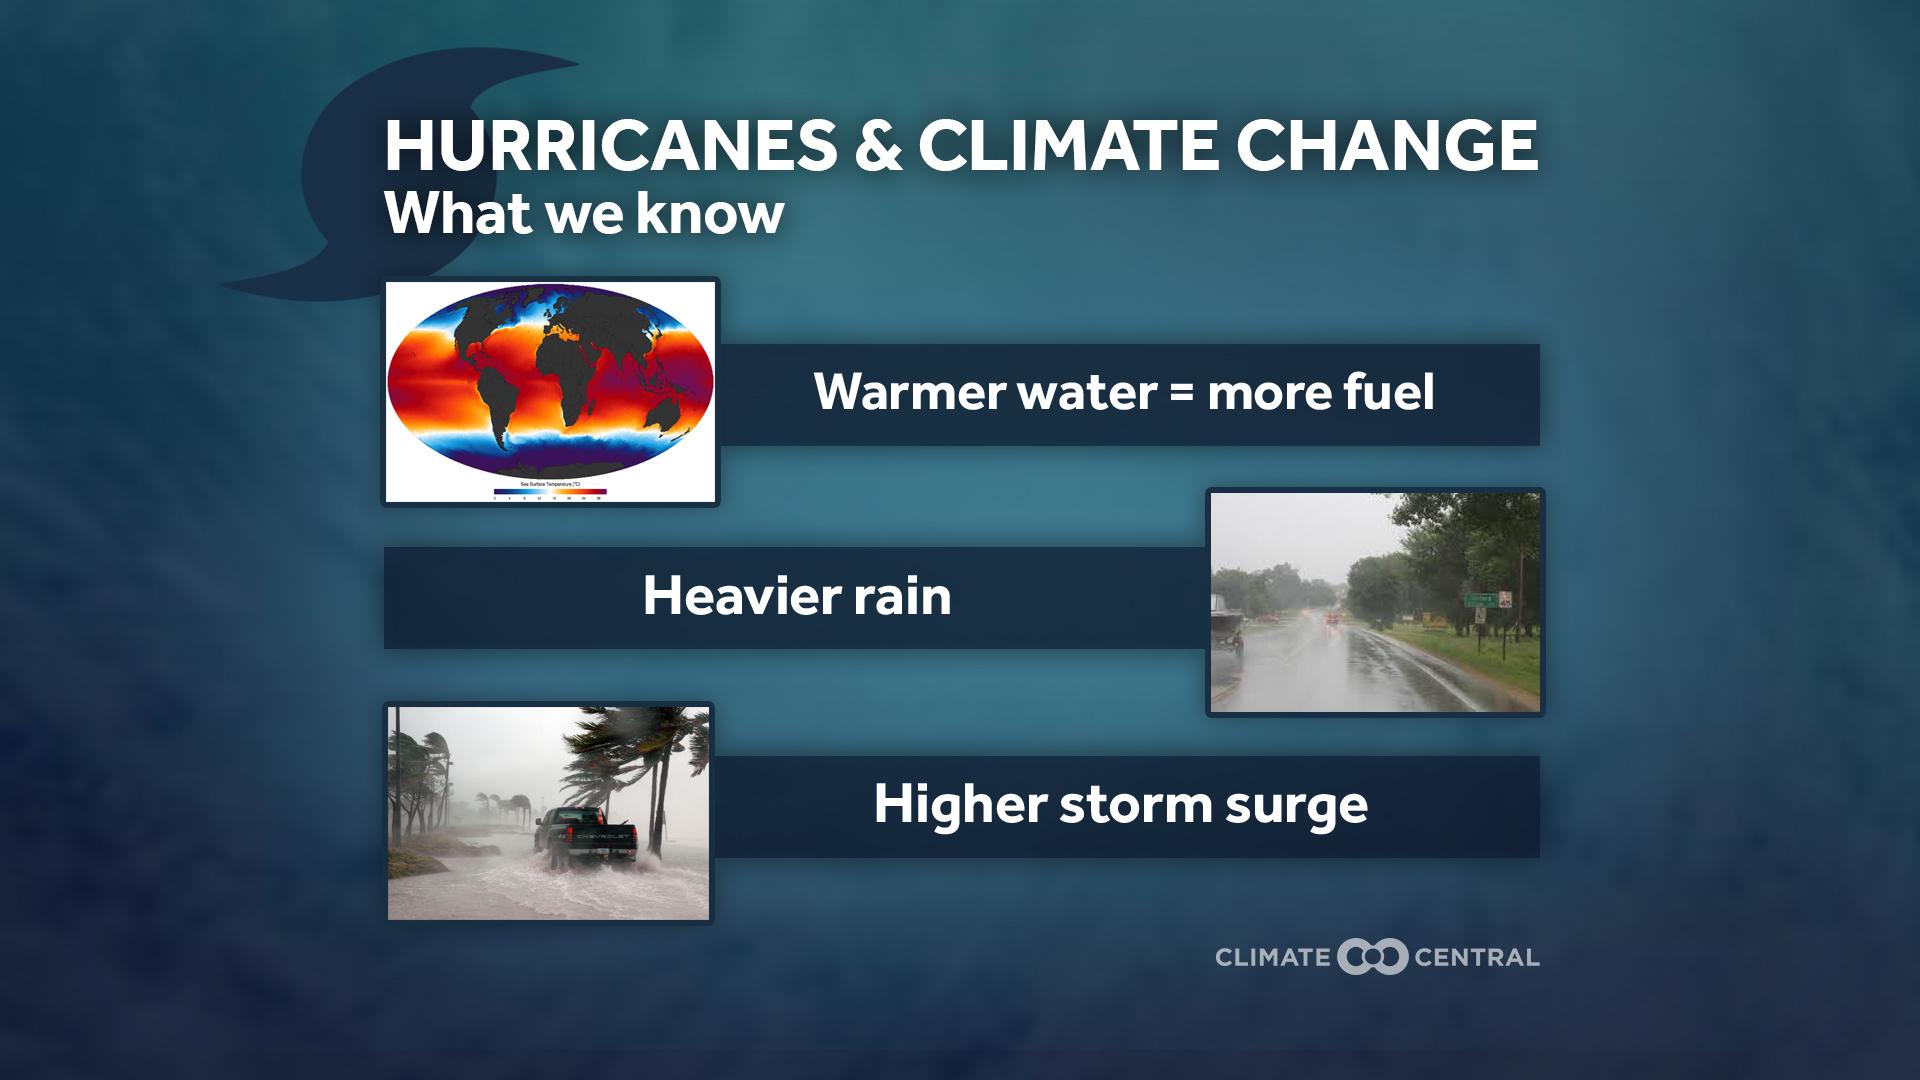 Hurricanes and Climate Change: What We Know - 2020 Hurricane Season